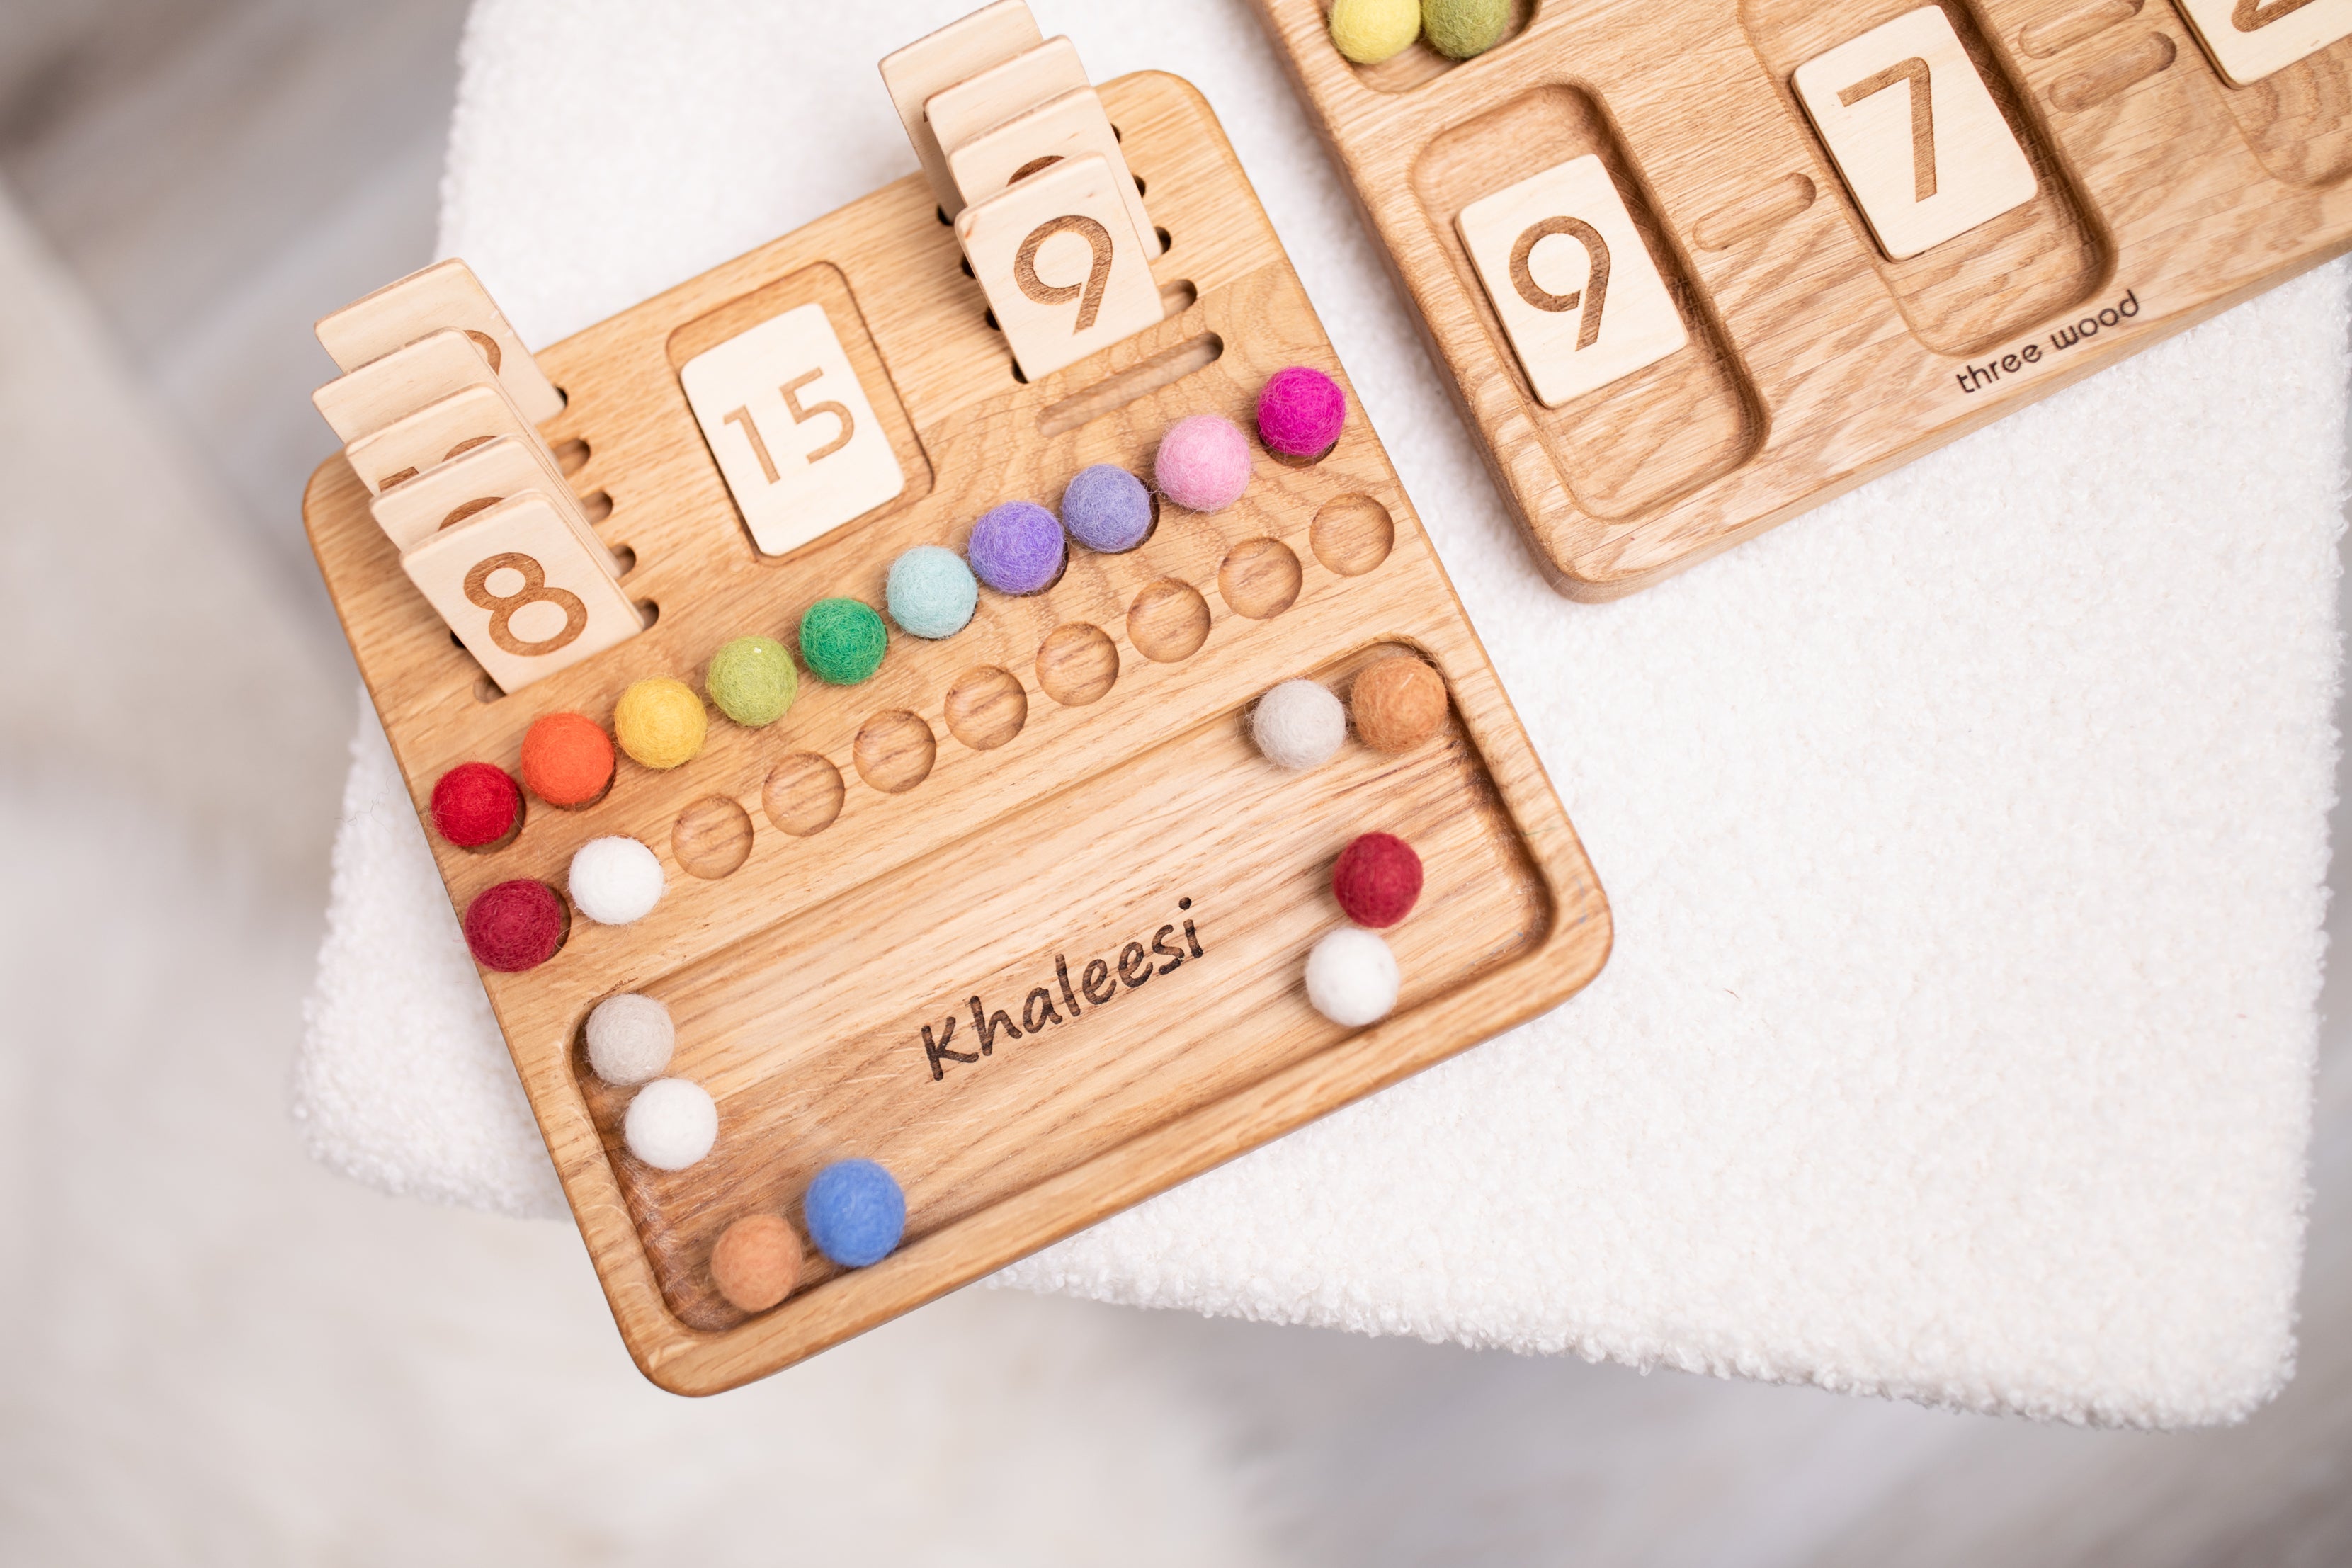 Wooden Number Set Handmade Walnut Wood Numerals & Math Equation Symbols  montessori Movable Numbers and Homeschool Math Wooden Toys 